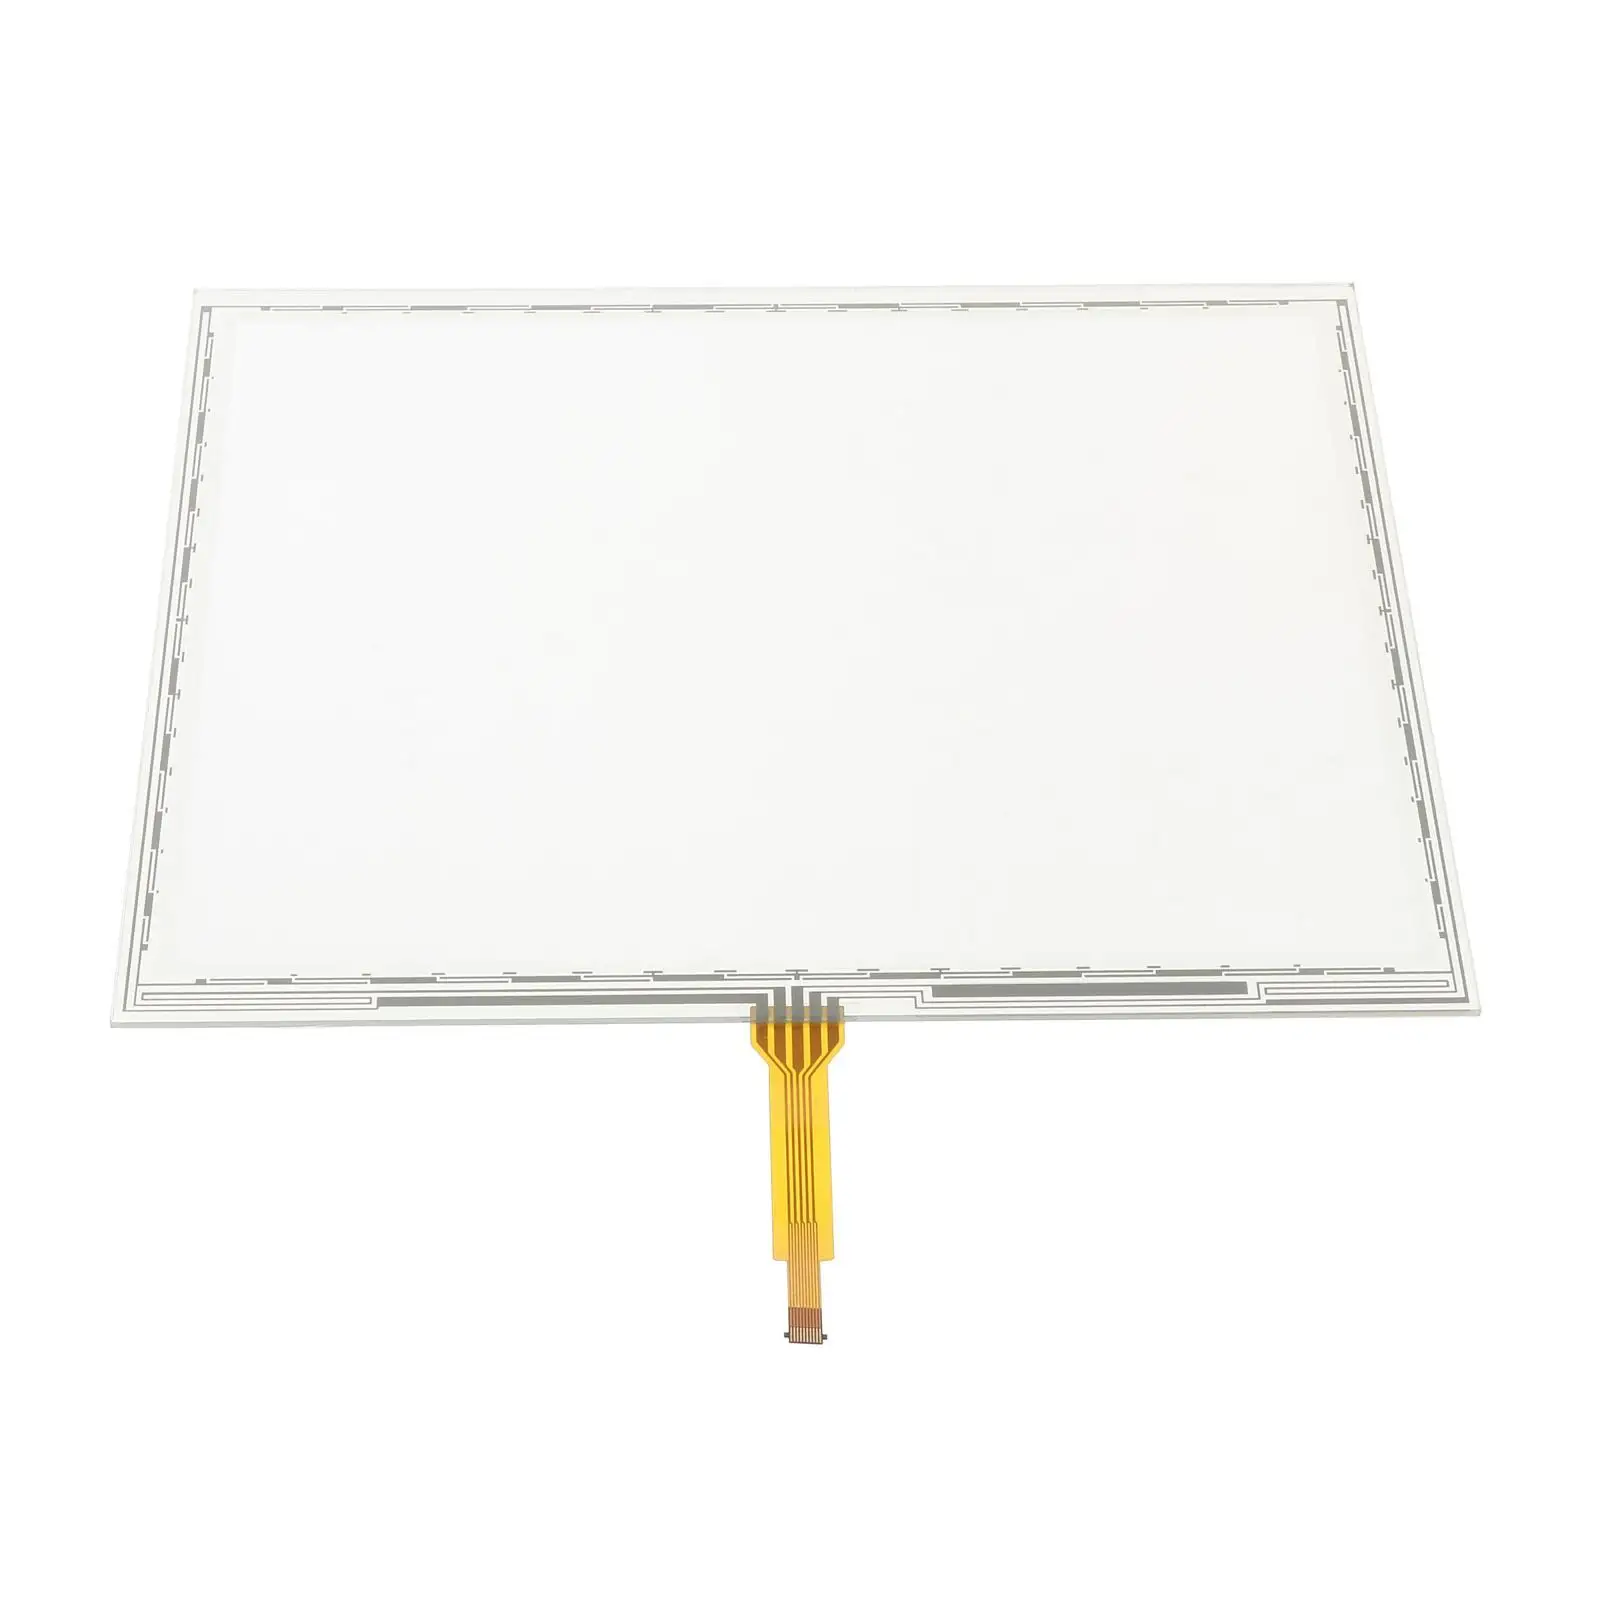 Touch Screen Panel Fpc-863Ne 9.09inchx7.17inch LCD Display Panel for 4640 High Precision Direct Mount Repair Parts